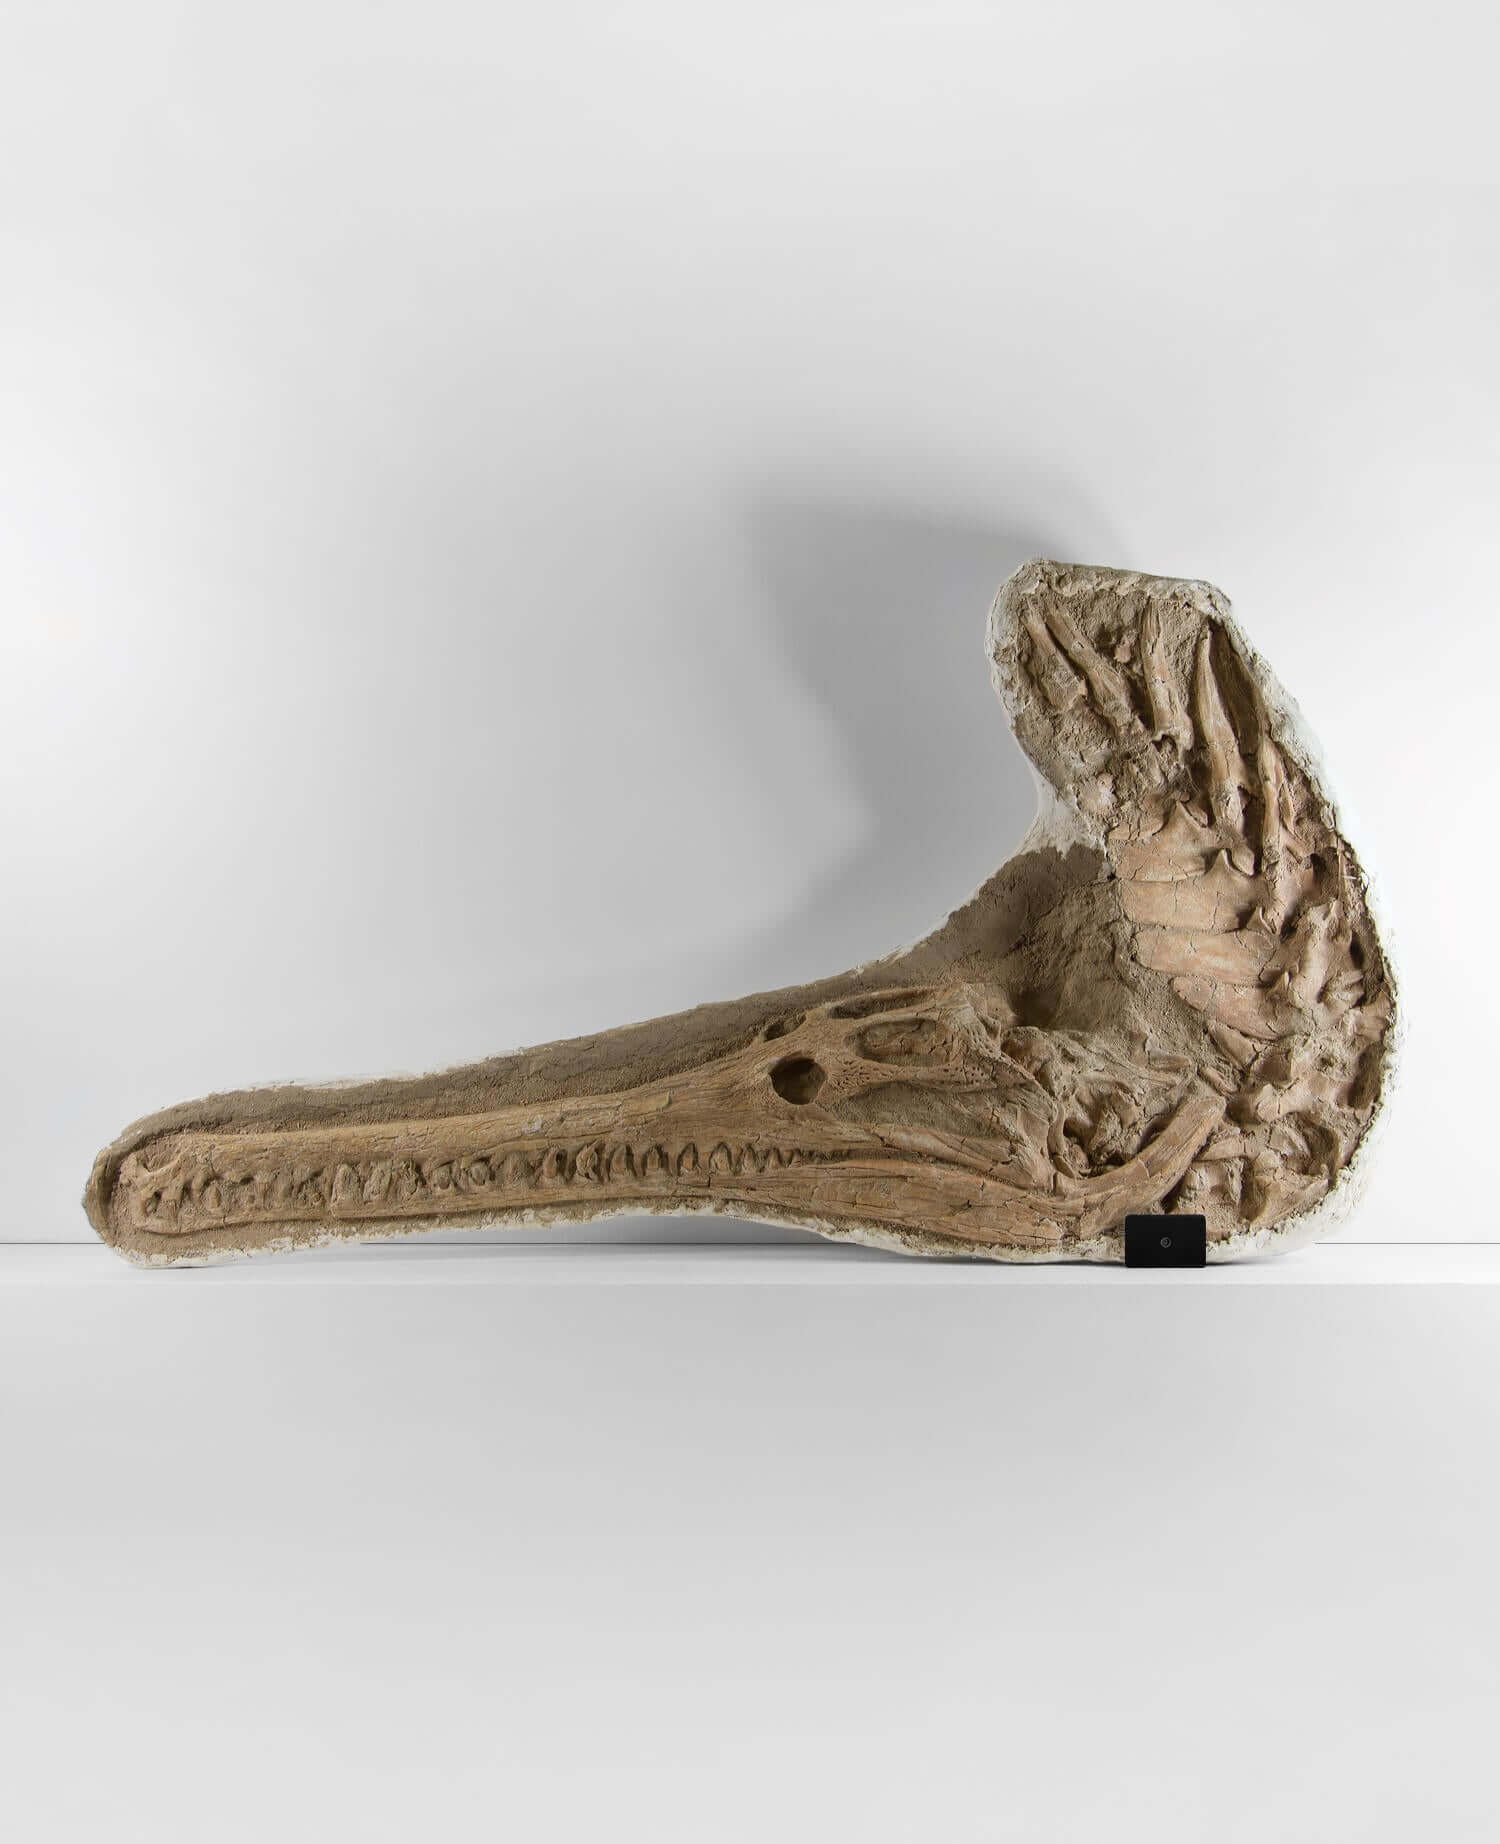 Highly important museum-quality Dyrosaurus Crocodile fossil Skull for sale measuring 1.31 meters